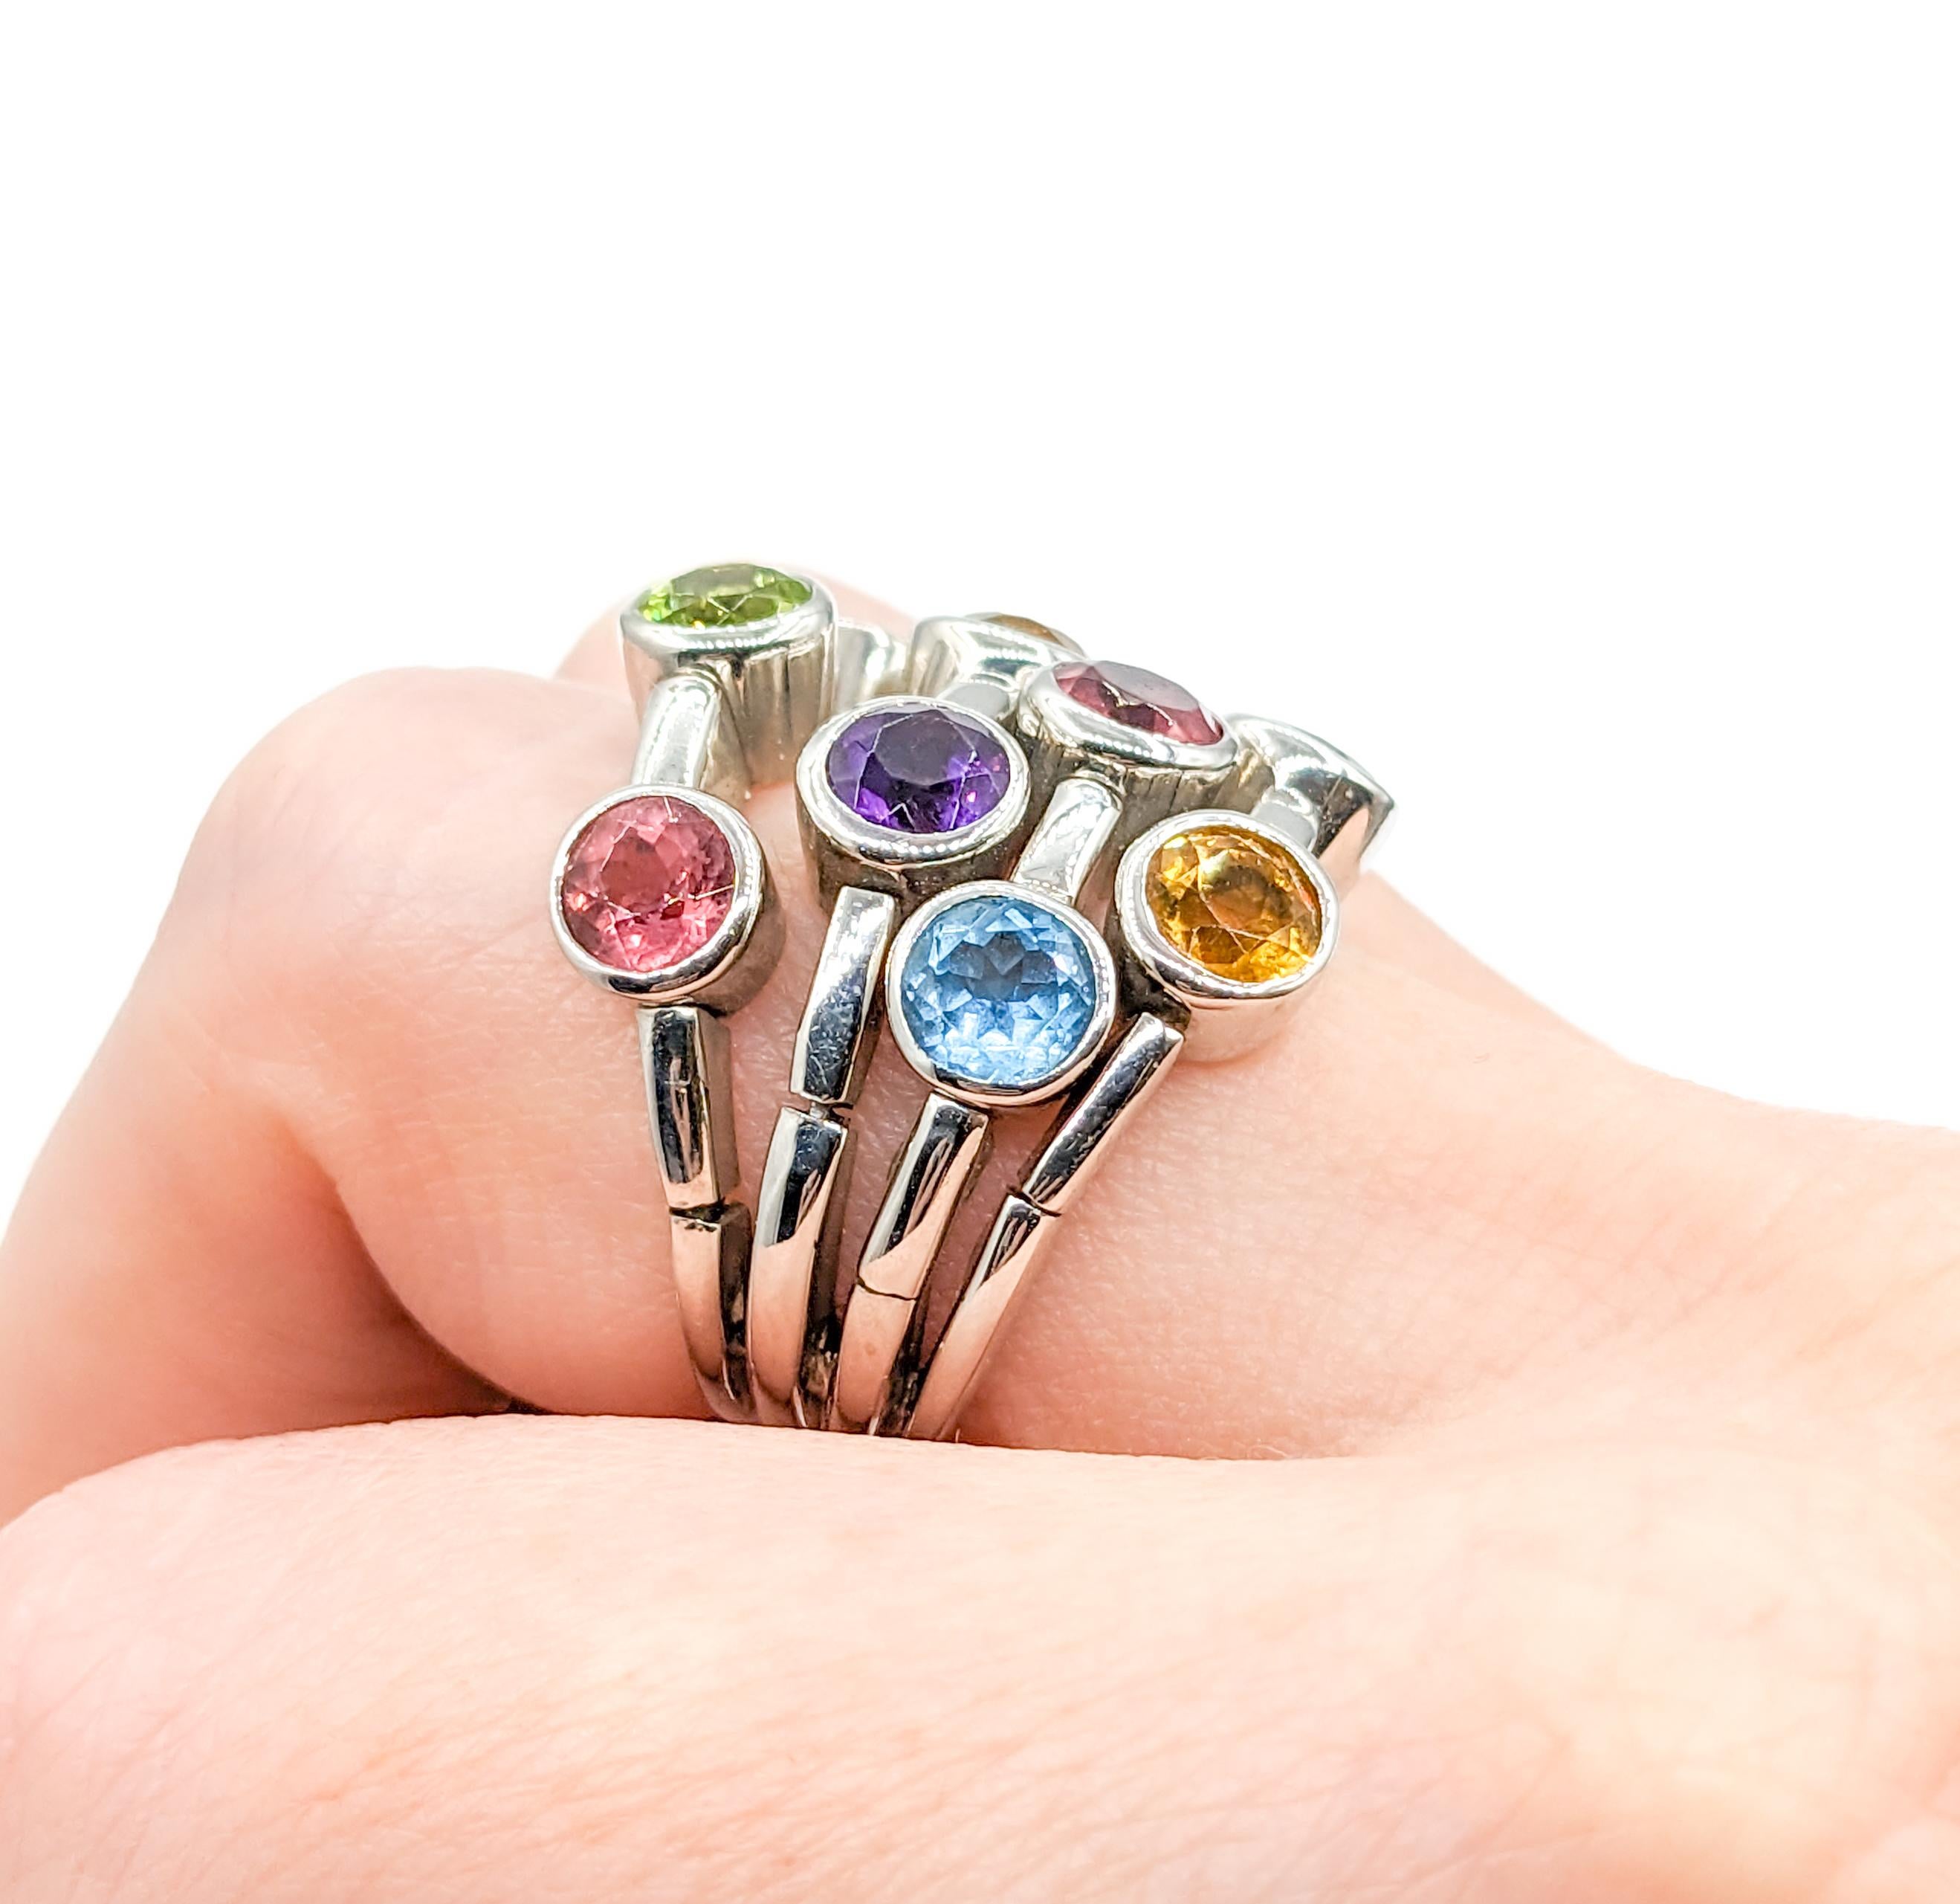 Sonia Bitton Flexible Multi Gemstone Ring

Discover the artistry of Sonia B (Sonia Bitton). in this striking ring, exquisitely fashioned in 14k white gold. It takes pride in showcasing ten 5mm multi-gemstones, each gleaming with its distinct charm